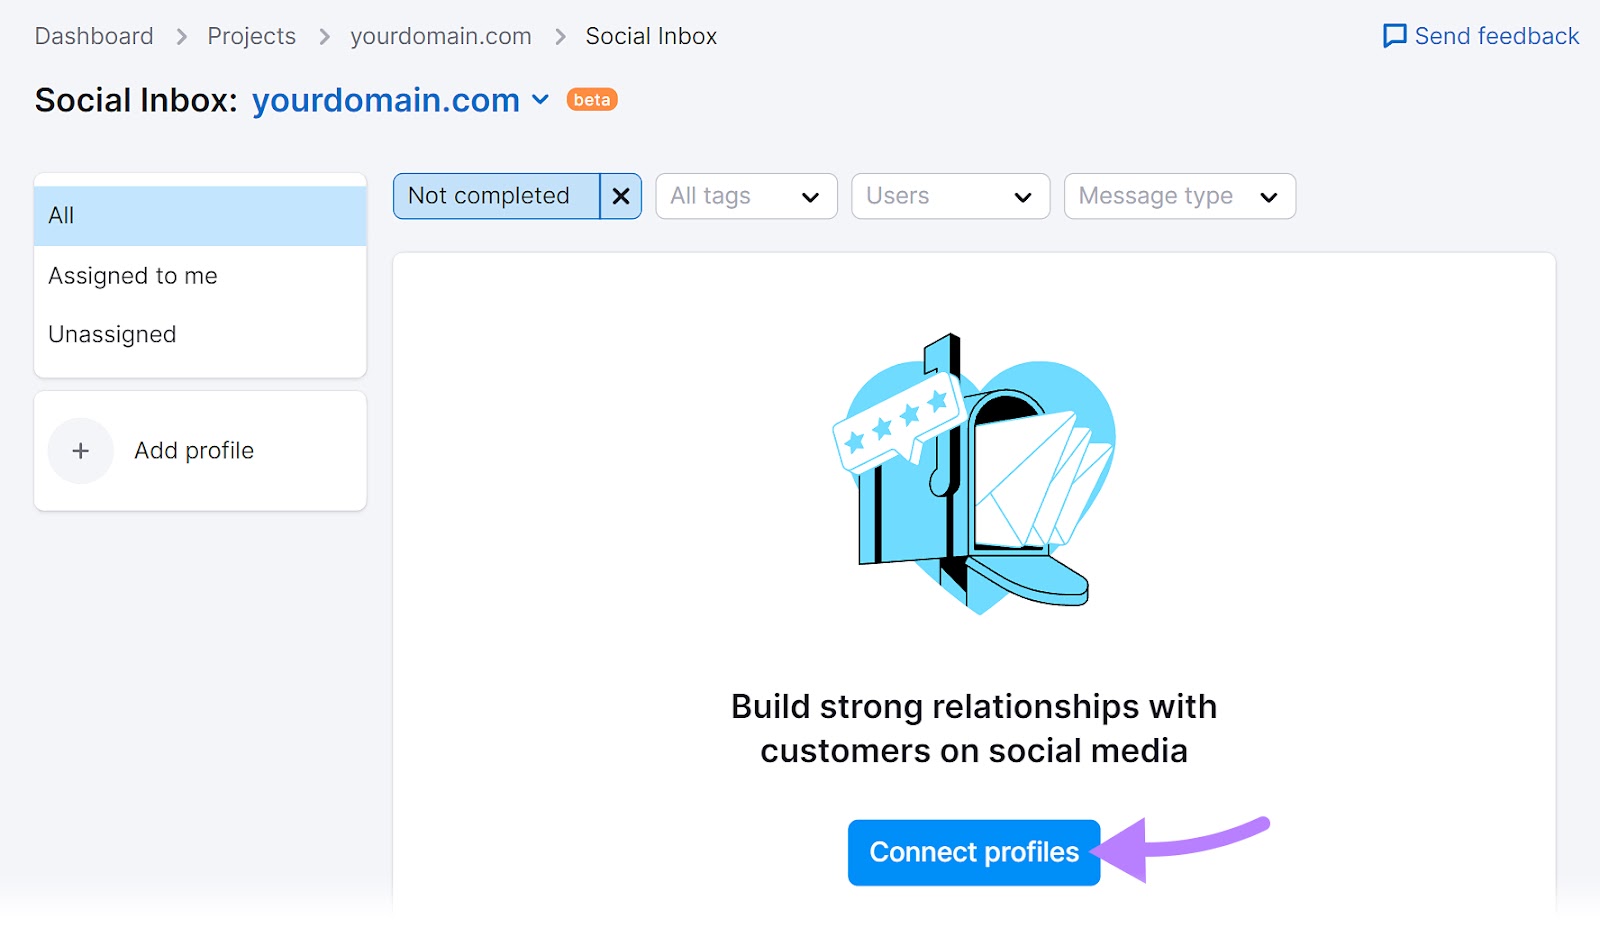 “Connect profiles” button in Social Inbox